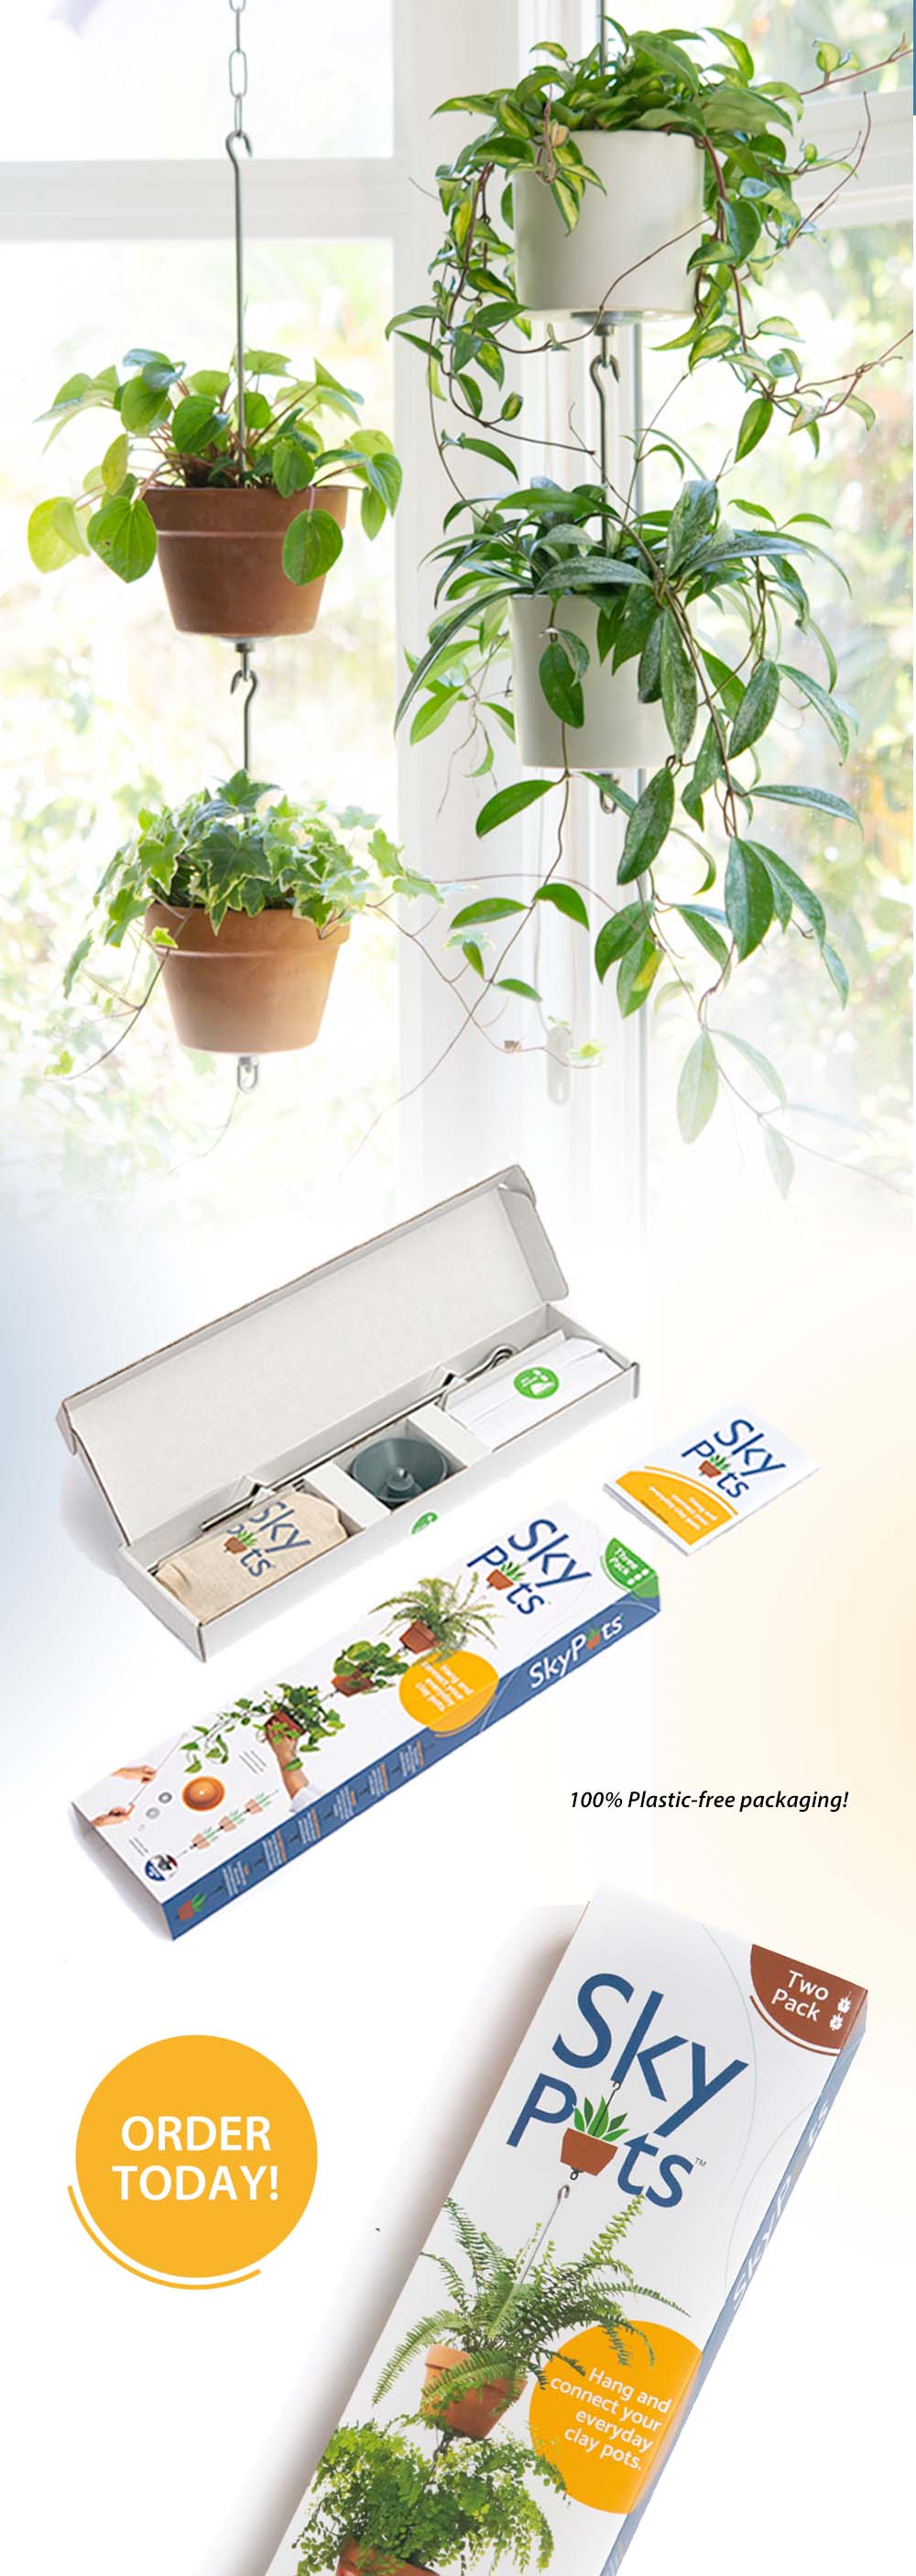 Collage of SkyPots arrangement and image of SkyPots packs. Order today! 100% Plastic Free packaging.